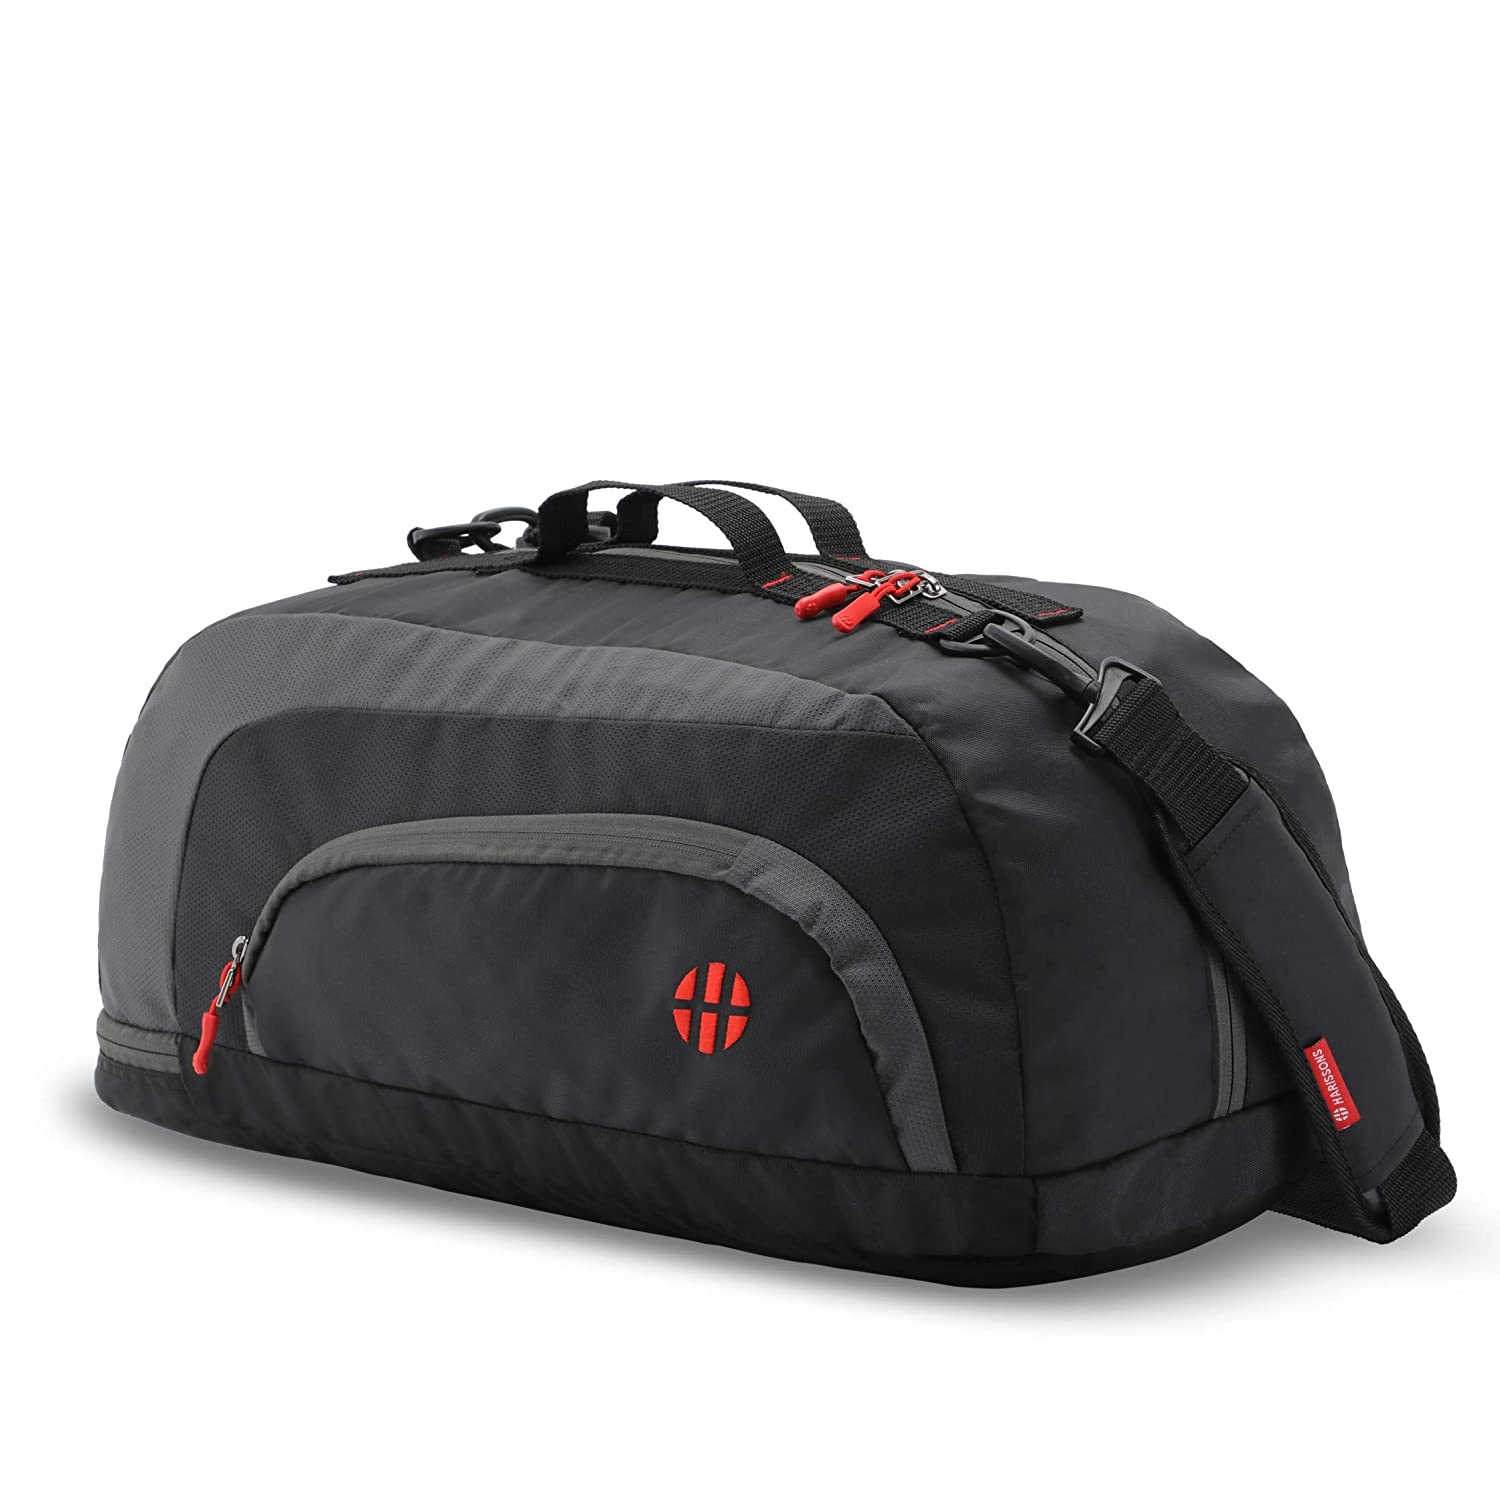 Gym Duffel/ Sports Bag for Men and Women with Shoe Compartment (31 Ltrs, Black, Grey)